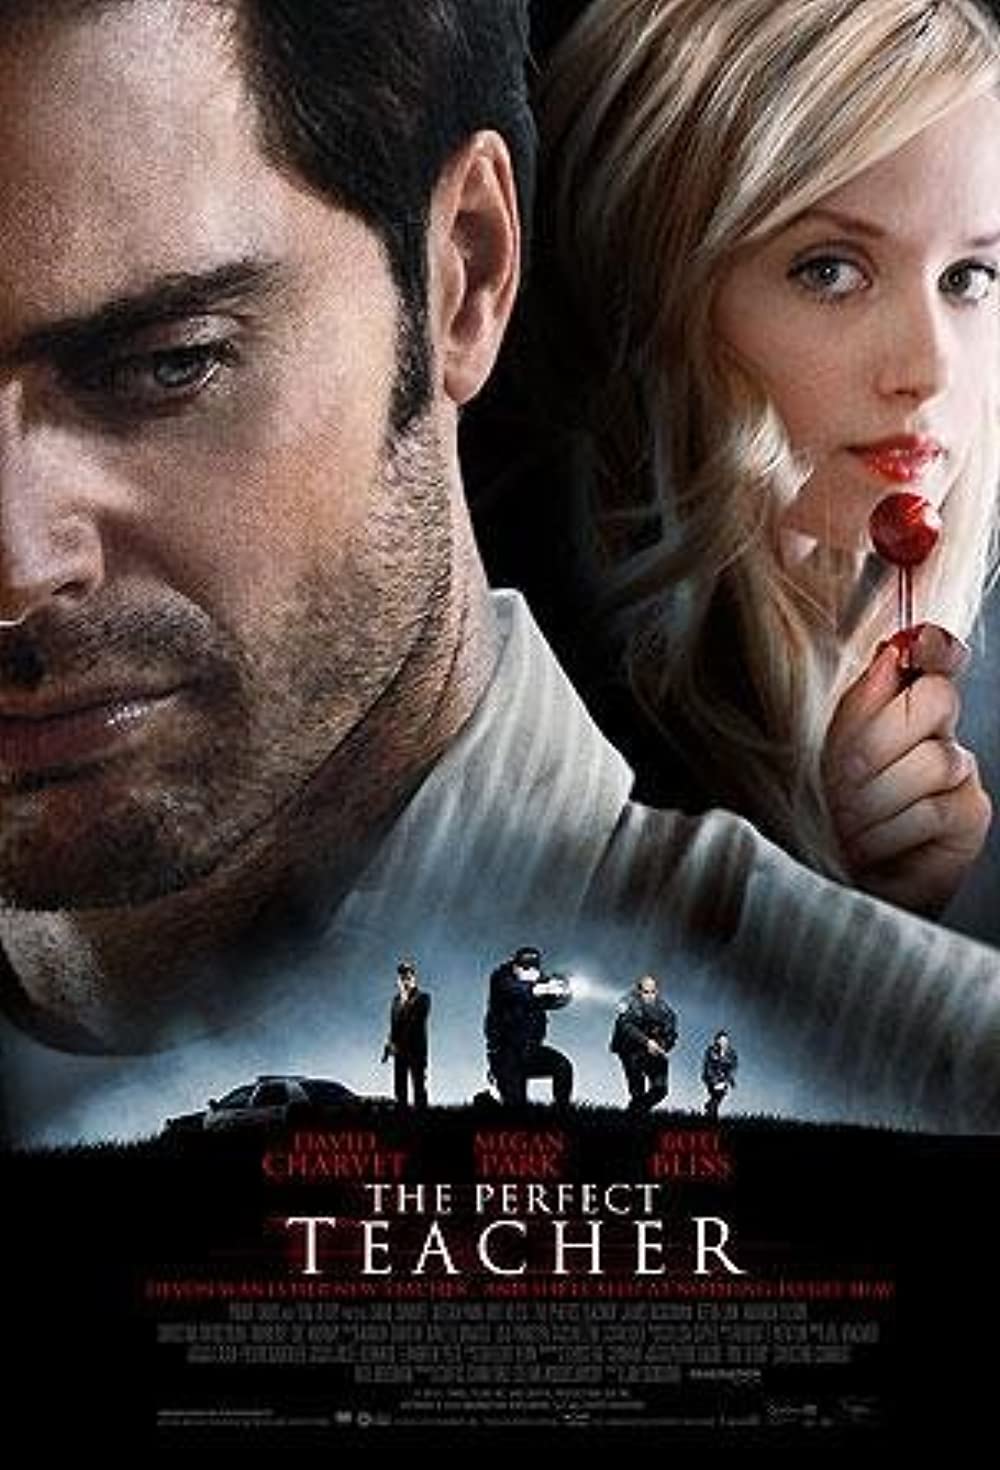 The Perfect Teacher Movie Download - The Perfect Teacher